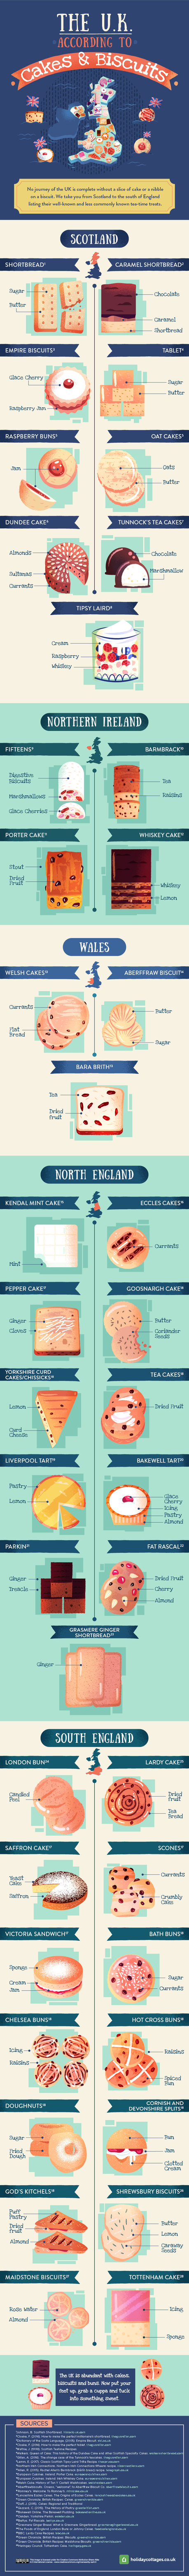 The UK according to cakes and biscuits